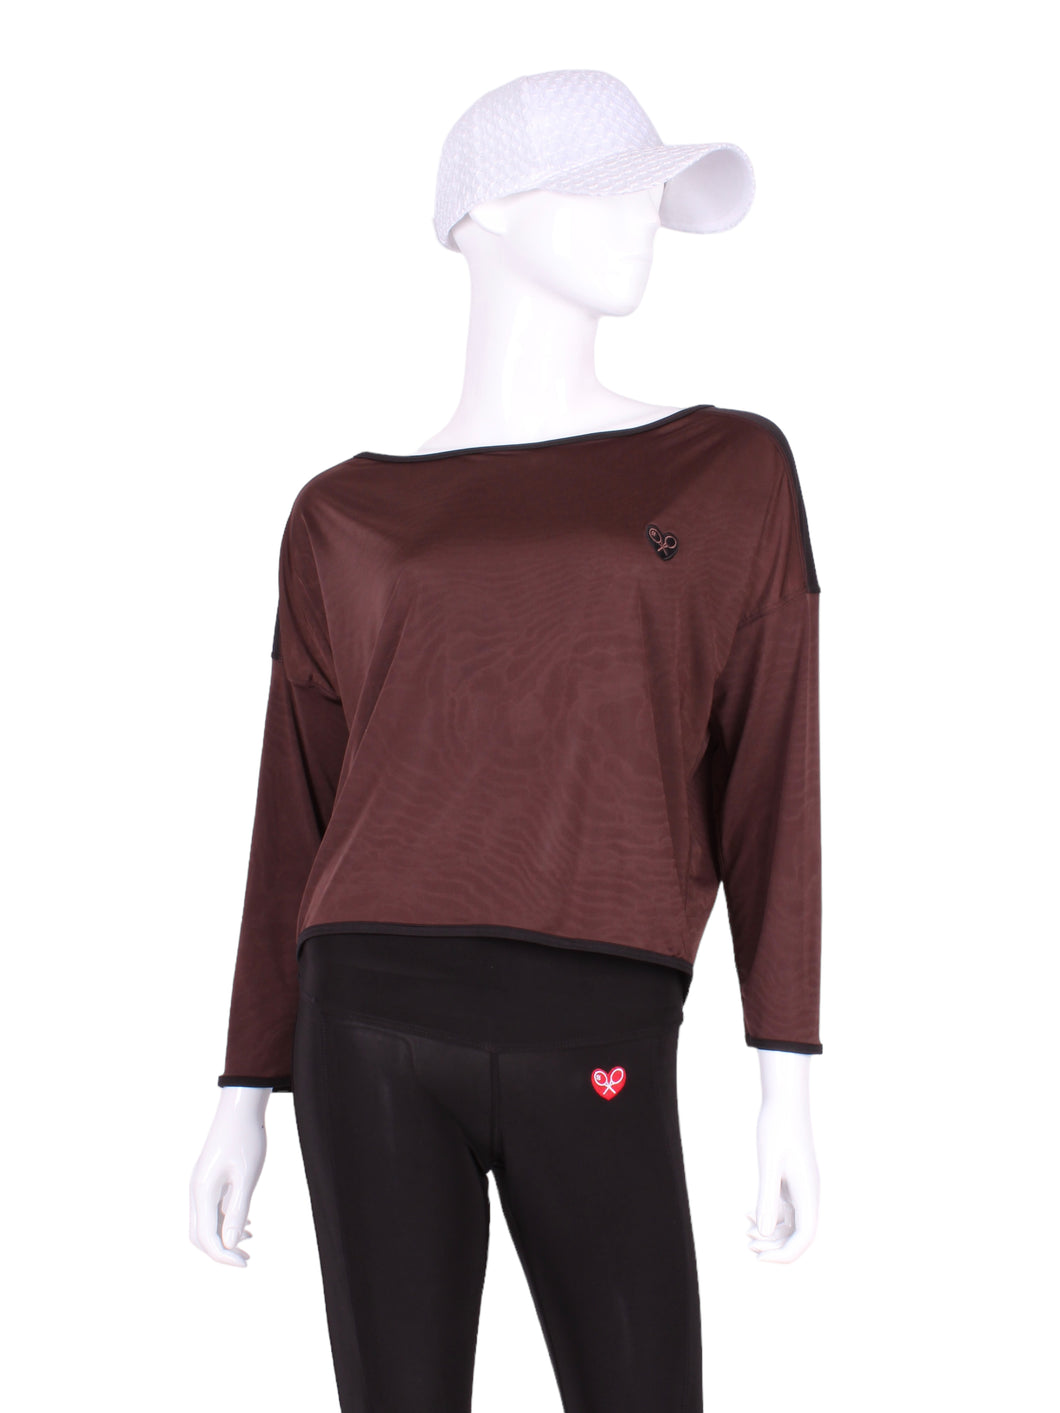 This is our limited edition Long Sleeve Baggy Top in beautiful brown.  This piece has a silky and soft fabric.   We make these in very small quantities - by design.  Unique.  Luxurious.  Comfortable.  Cool.  Fun.